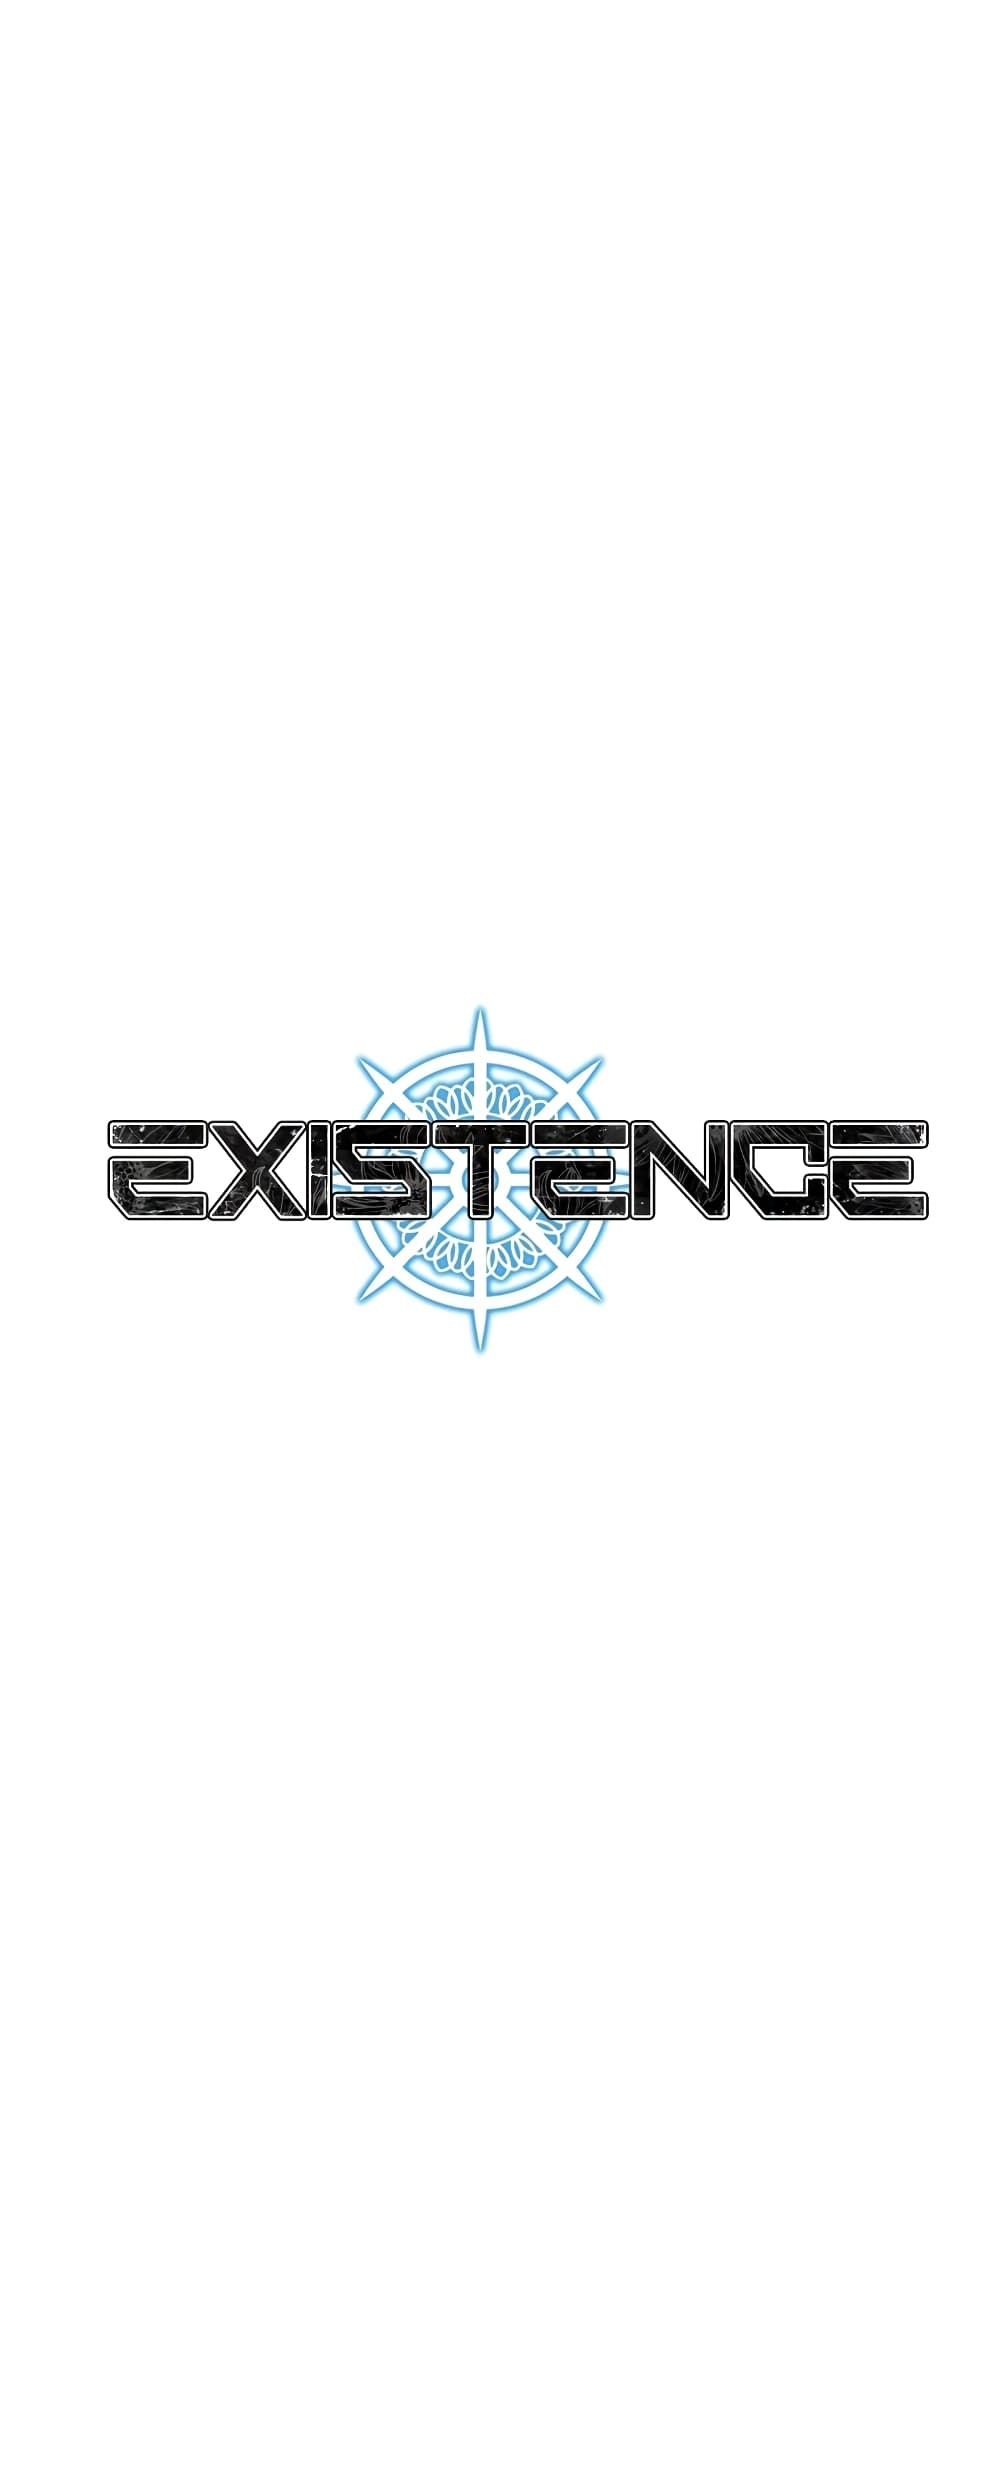 Existence 50-50